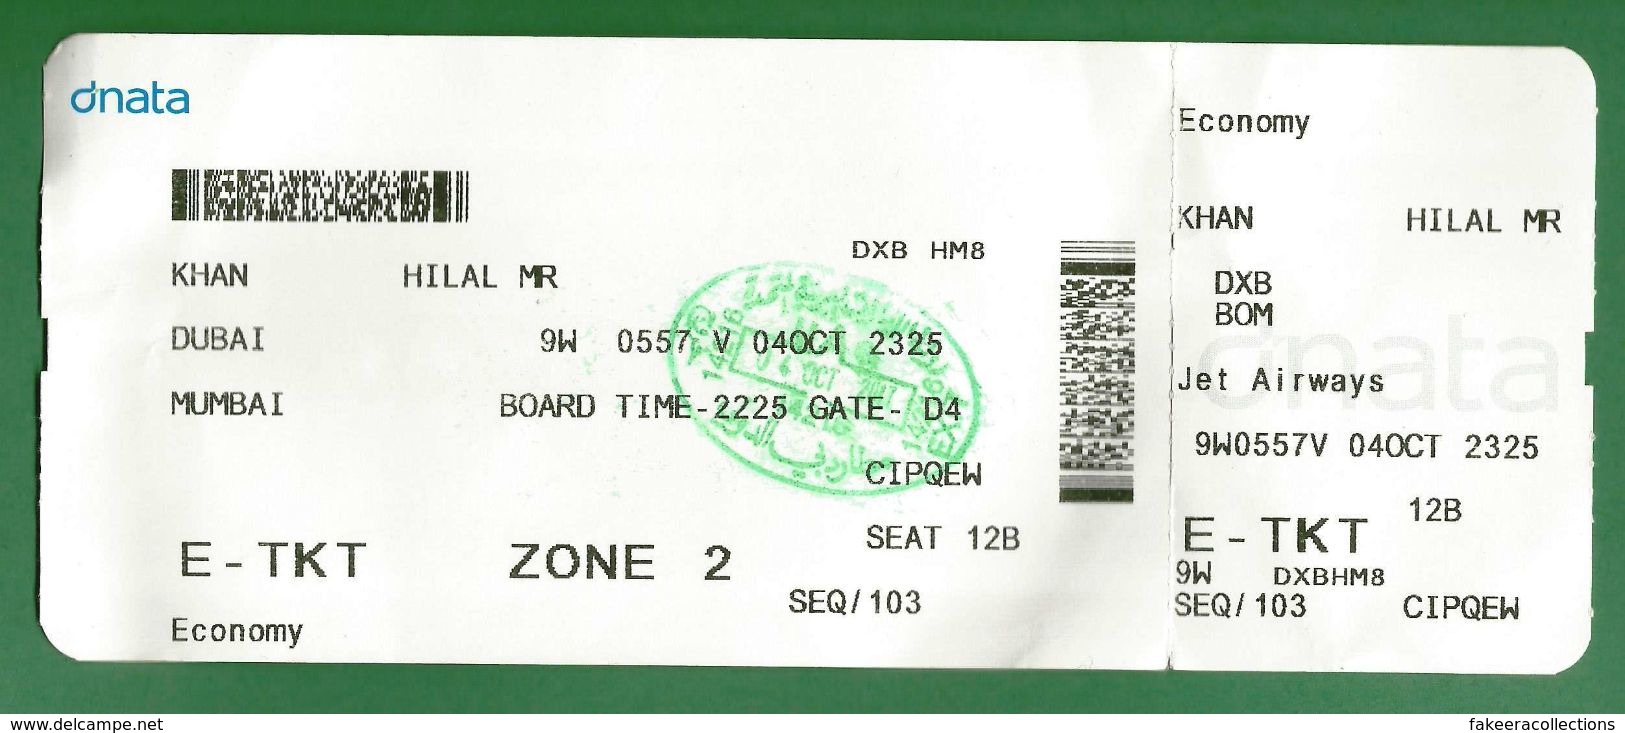 DUBAI, UAE To MUMBAI, INDIA - Boarding Card / Pass For JET AIRWAYS Issued By DNATA - Travel Ticket, Immigration Seal ... - Mondo